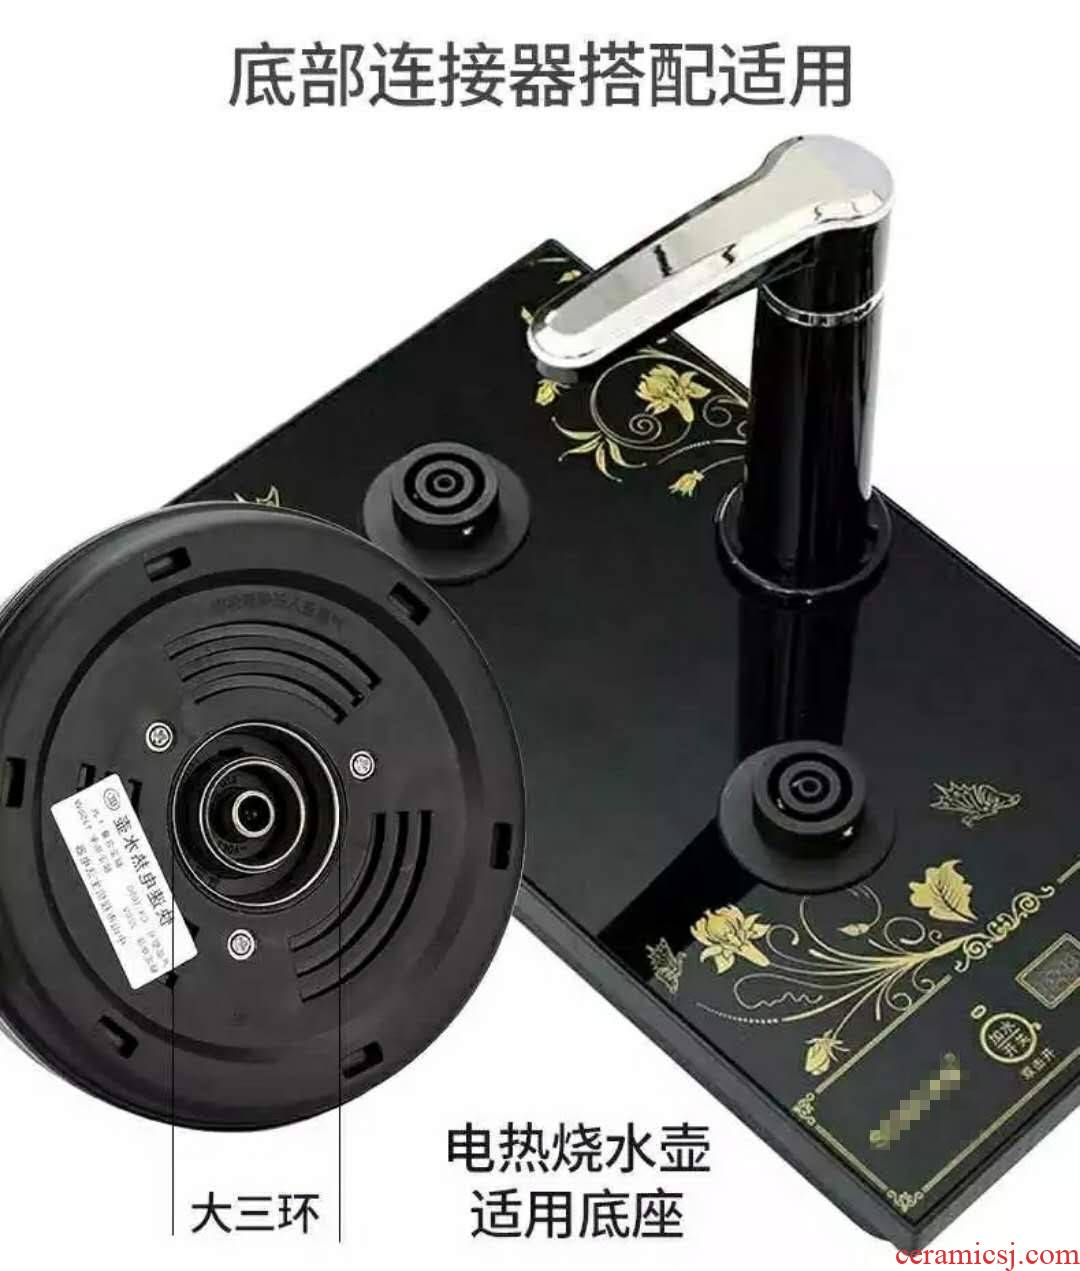 Automatic electric kettle tea set up the big three - ring kettle stainless steel rings all Mrs Qian wei accessories list